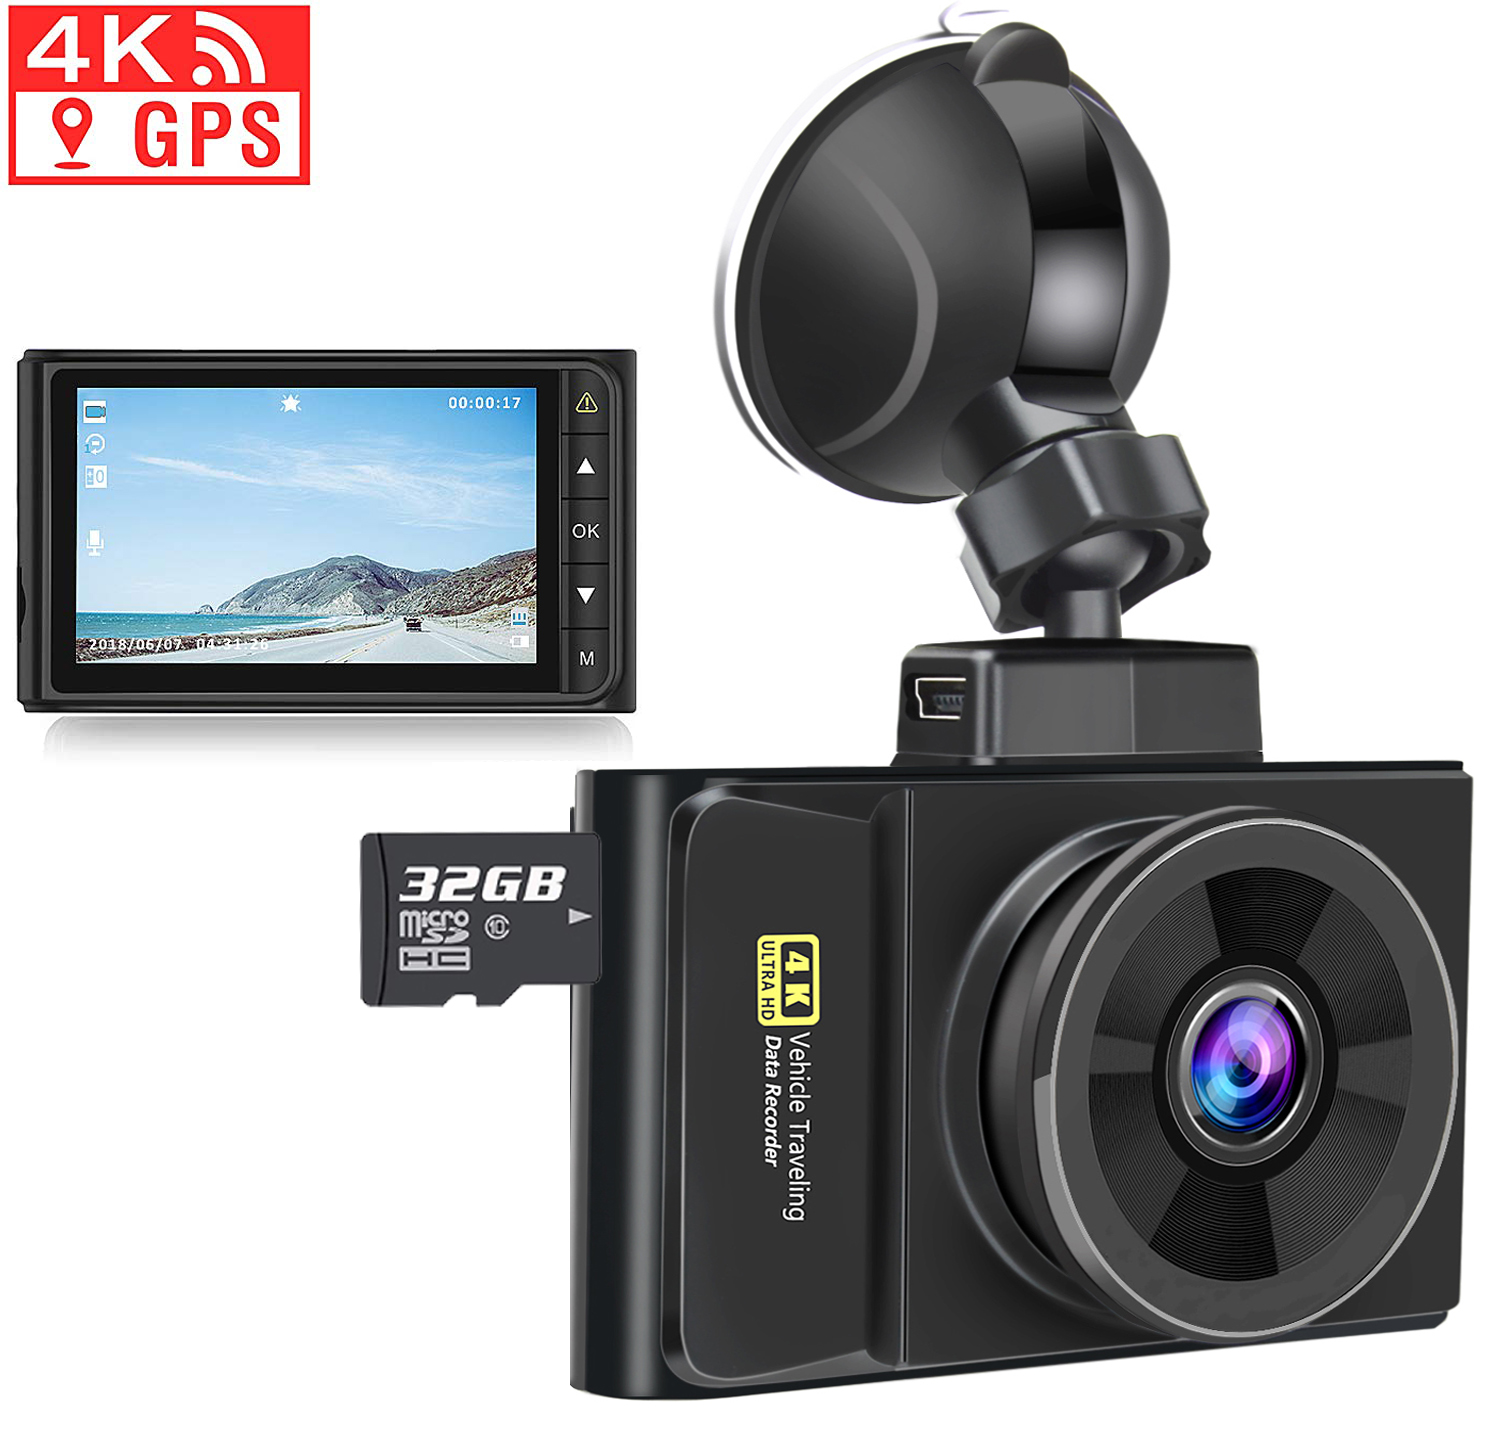 89.99 - AWESAFE Q8P 4K Dash Cams for Cars with 32GB SD Card UHD 2196P 3  inch Car in Dash Camera - uk.awesafeshop.com